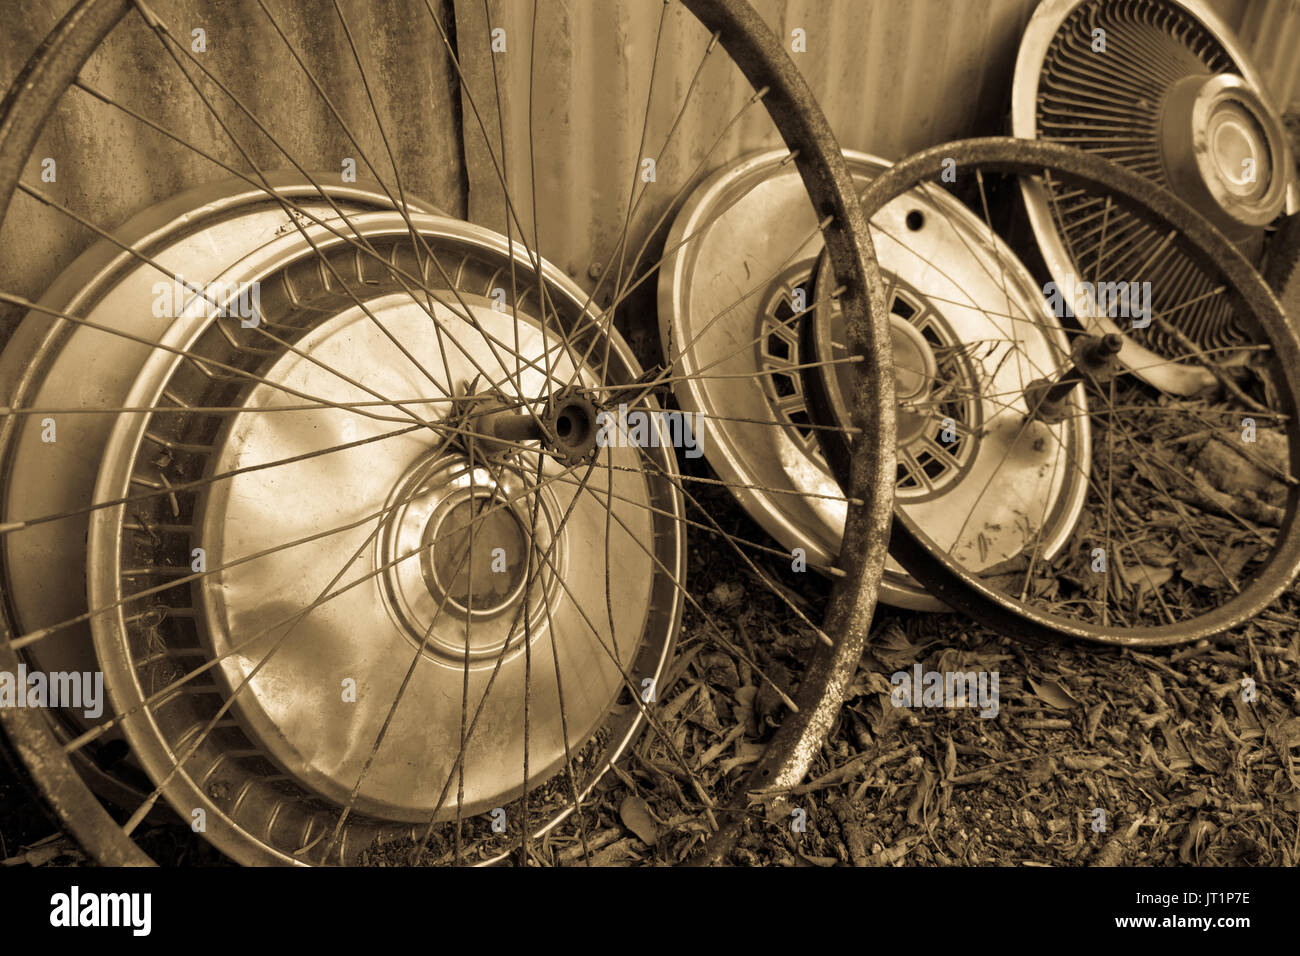 Sepia colored image, with circular shapes of antique bicycle wheels and old hubcaps from the 1960's and 1970's. Stock Photo